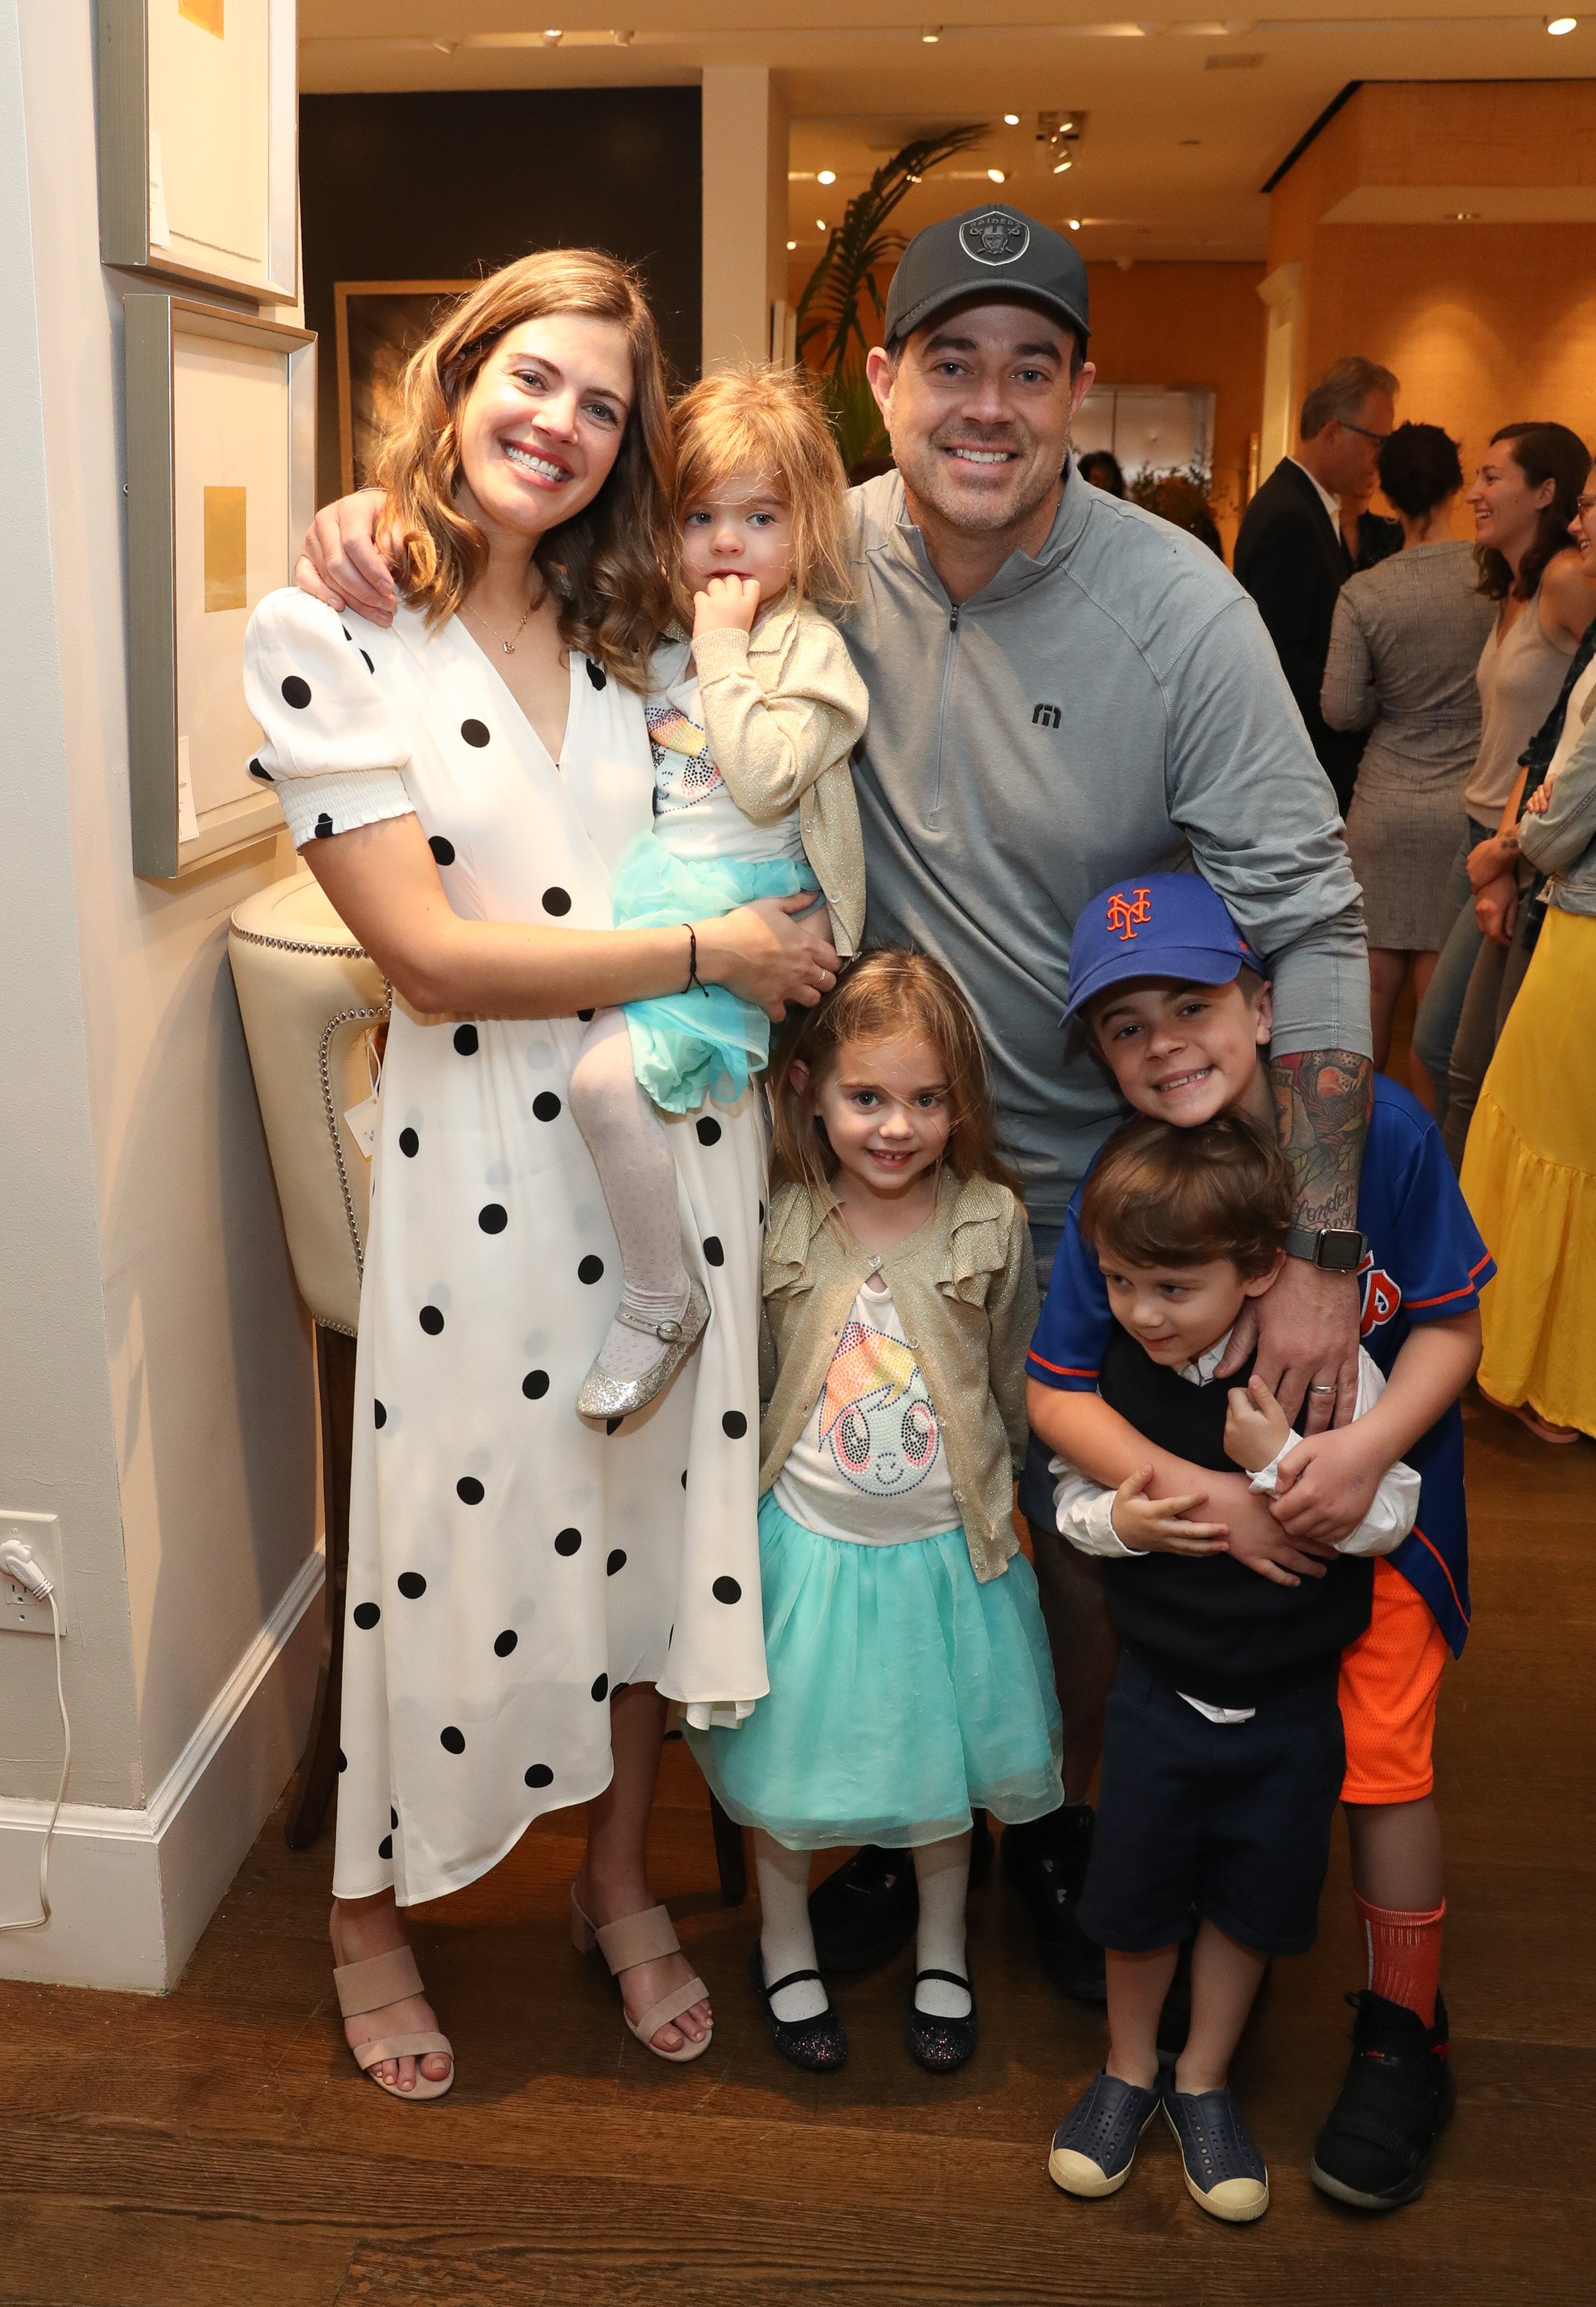  Siri and Carson Daly, and family, attend "Siriously Delicious" by Siri Daly book launch event on April 14, 2018, in New York City. | Source: Getty Images.